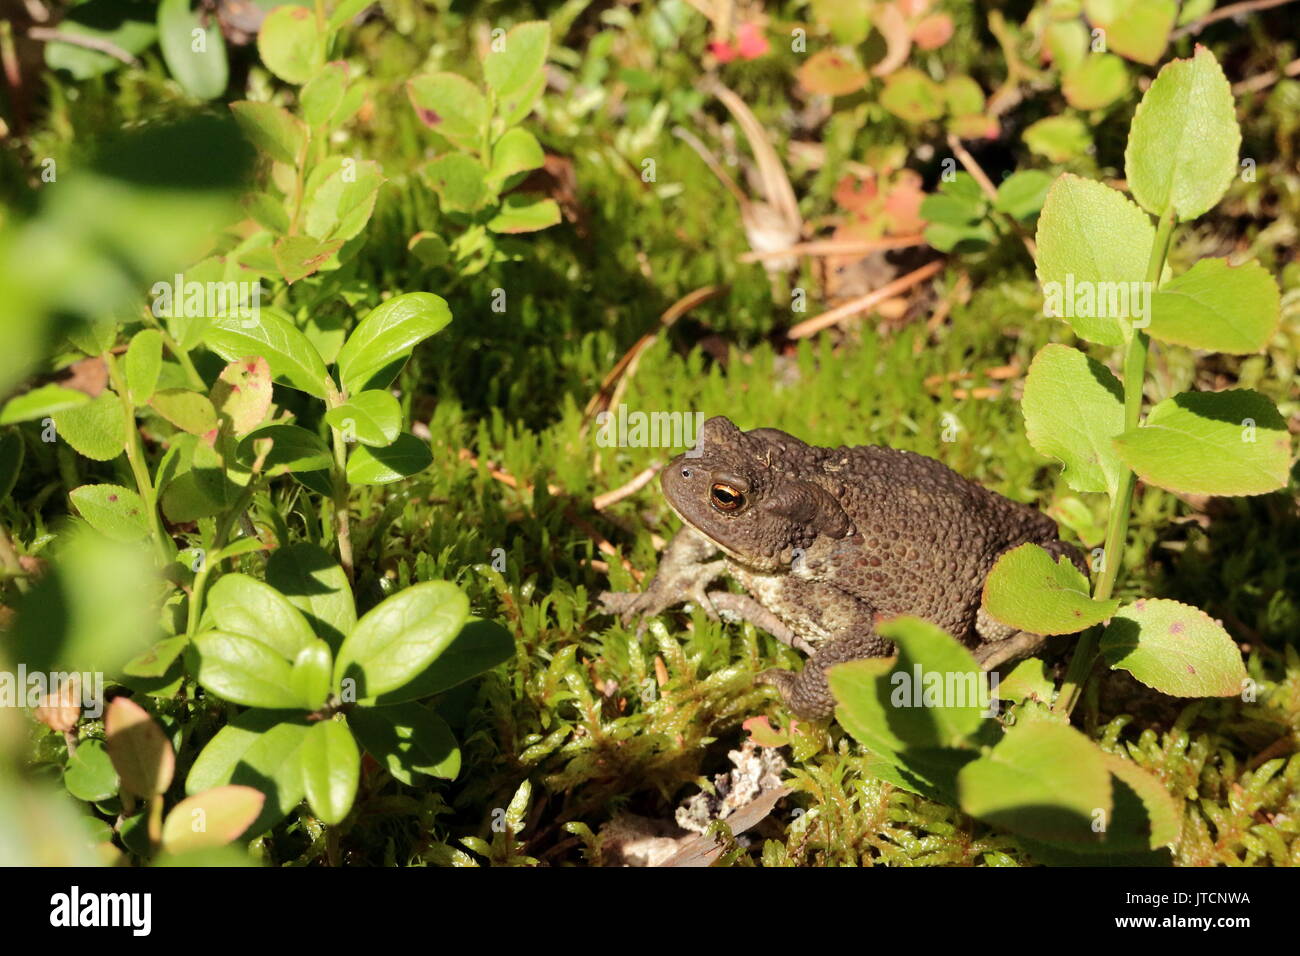 A toad sitting on the moss in the middle of blueberry twigs in the forest in Finland, North Karelia. Stock Photo